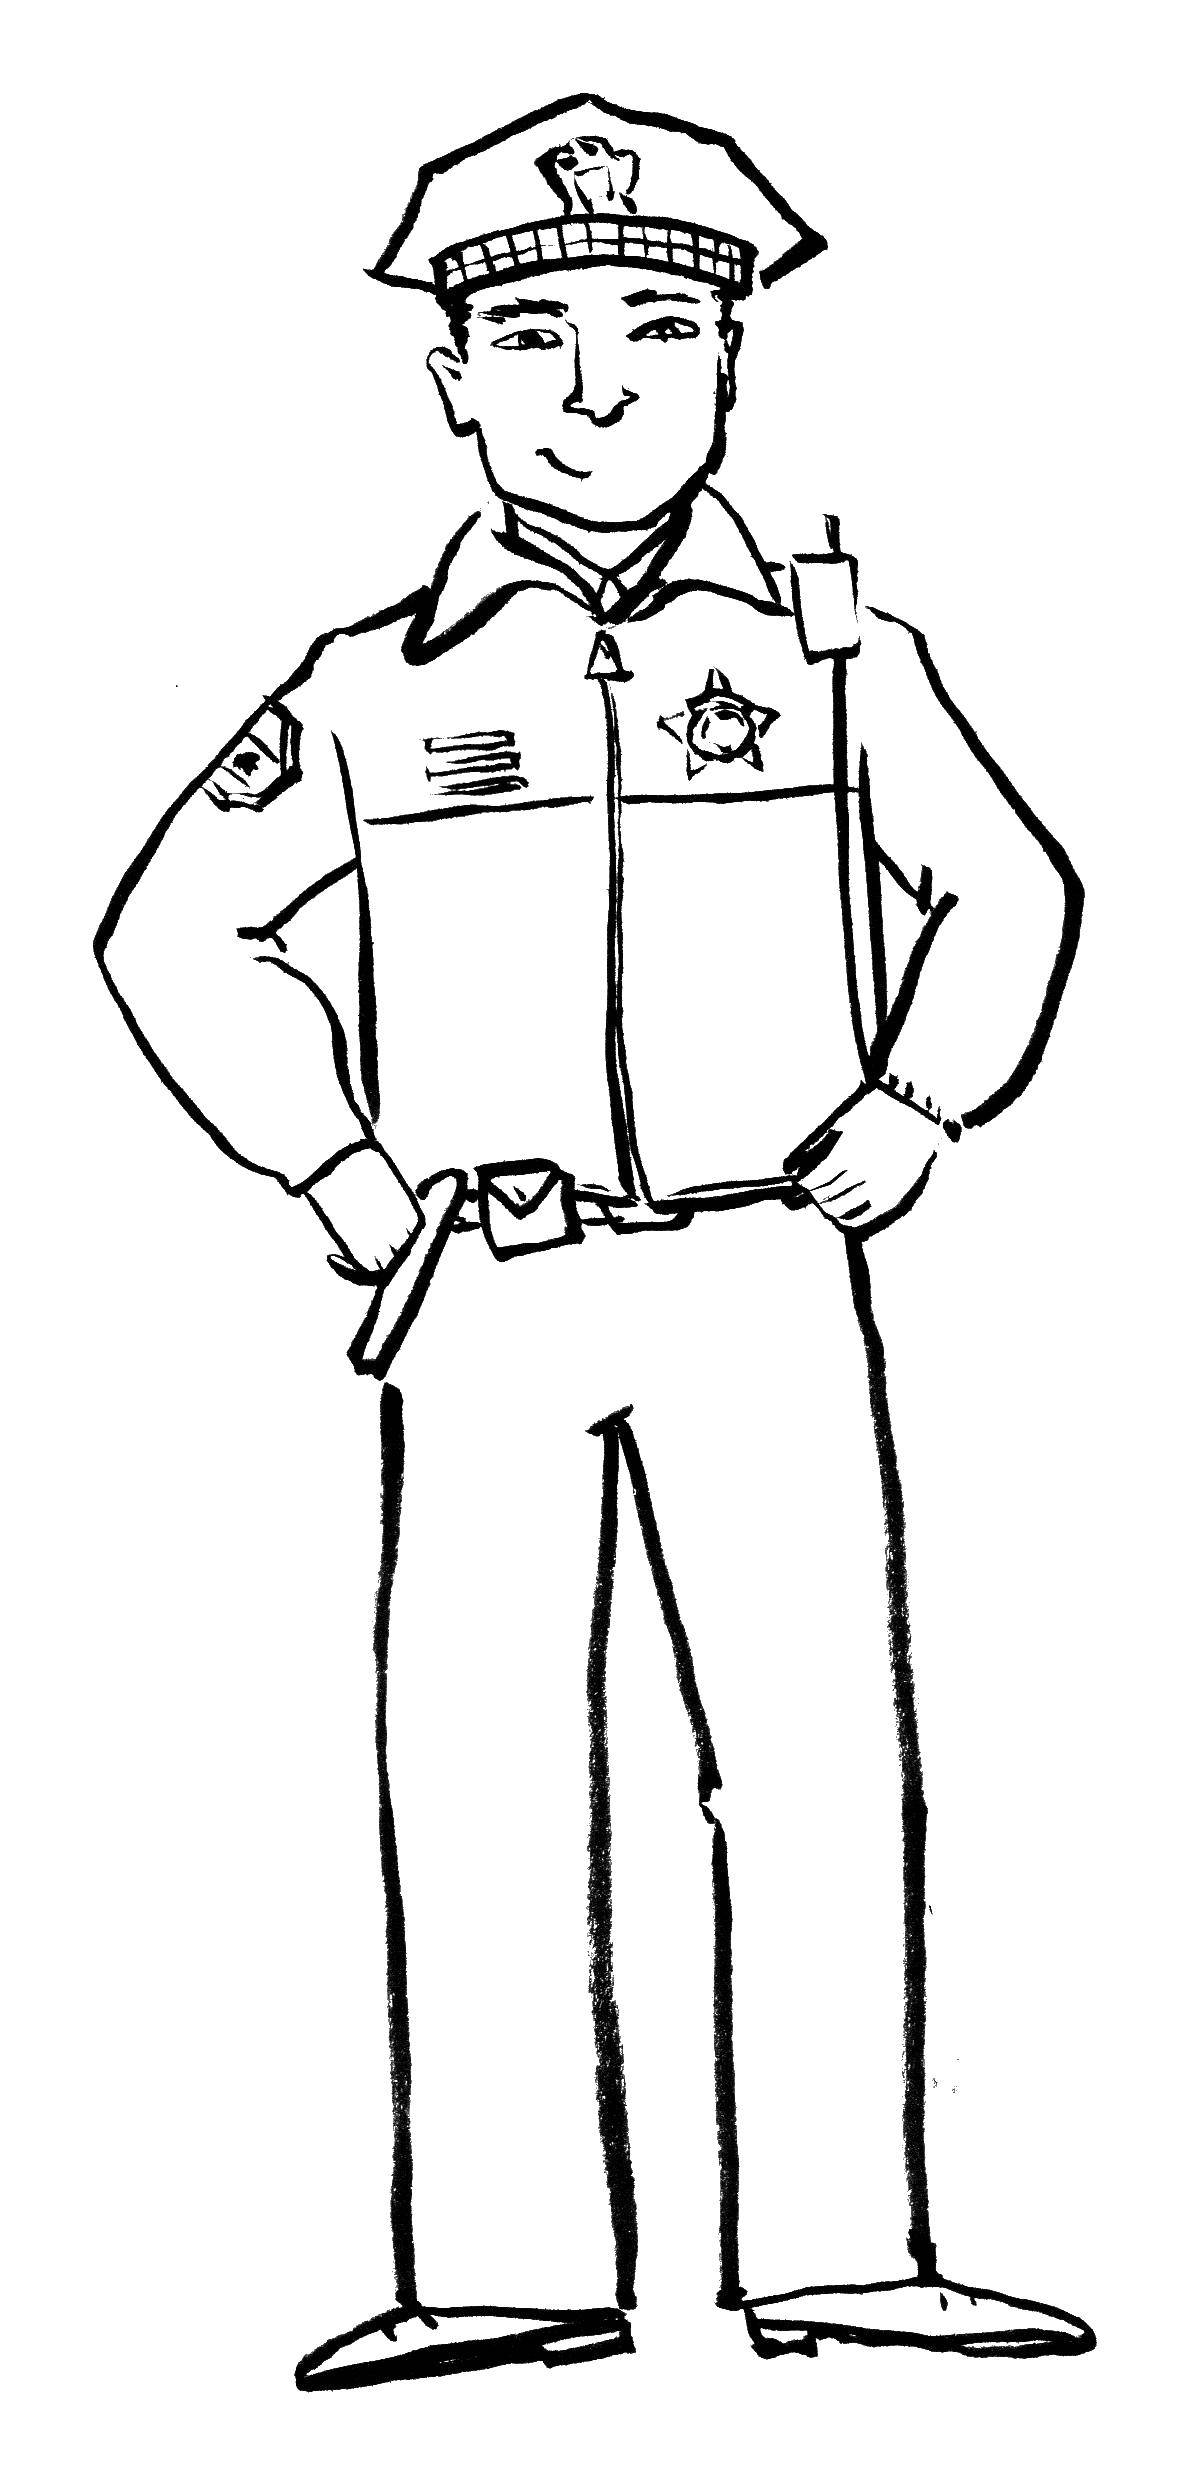 Coloring Police. Category police. Tags:  policeman, police.